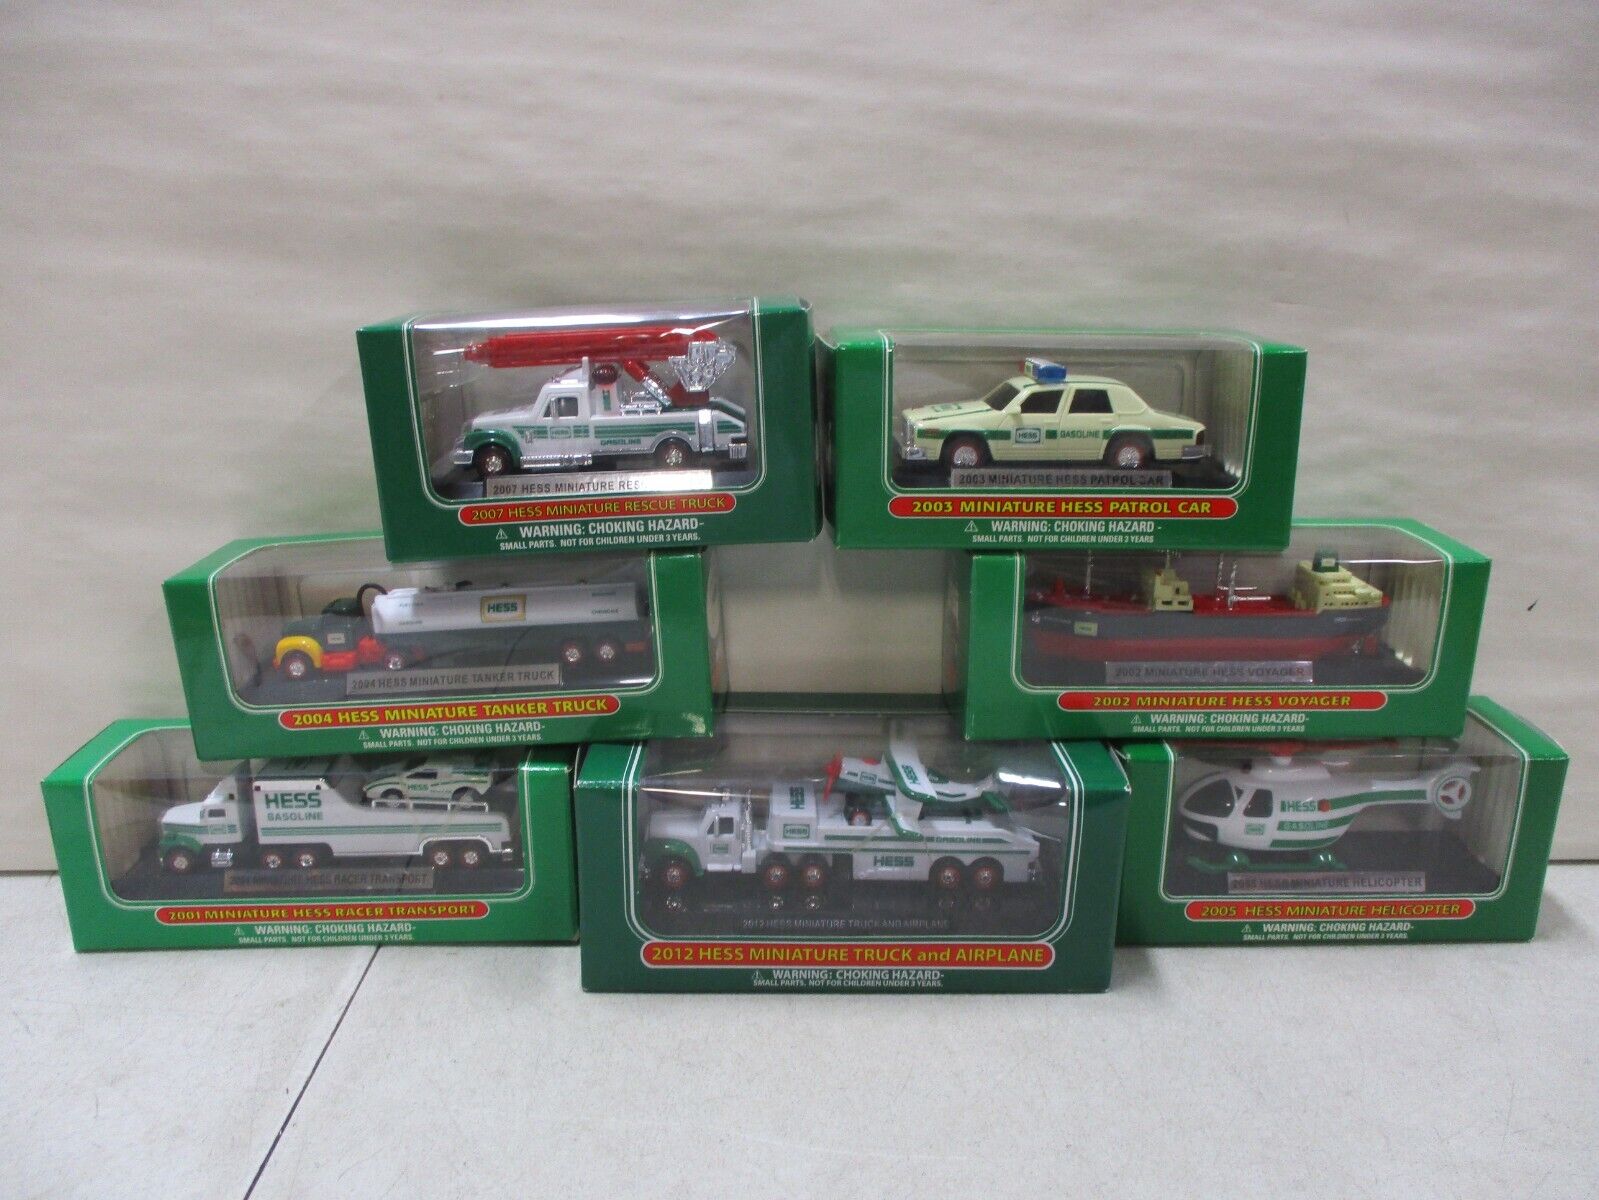 7 Hess Miniature Vehicles with Voyager, Airplane, Helicopter